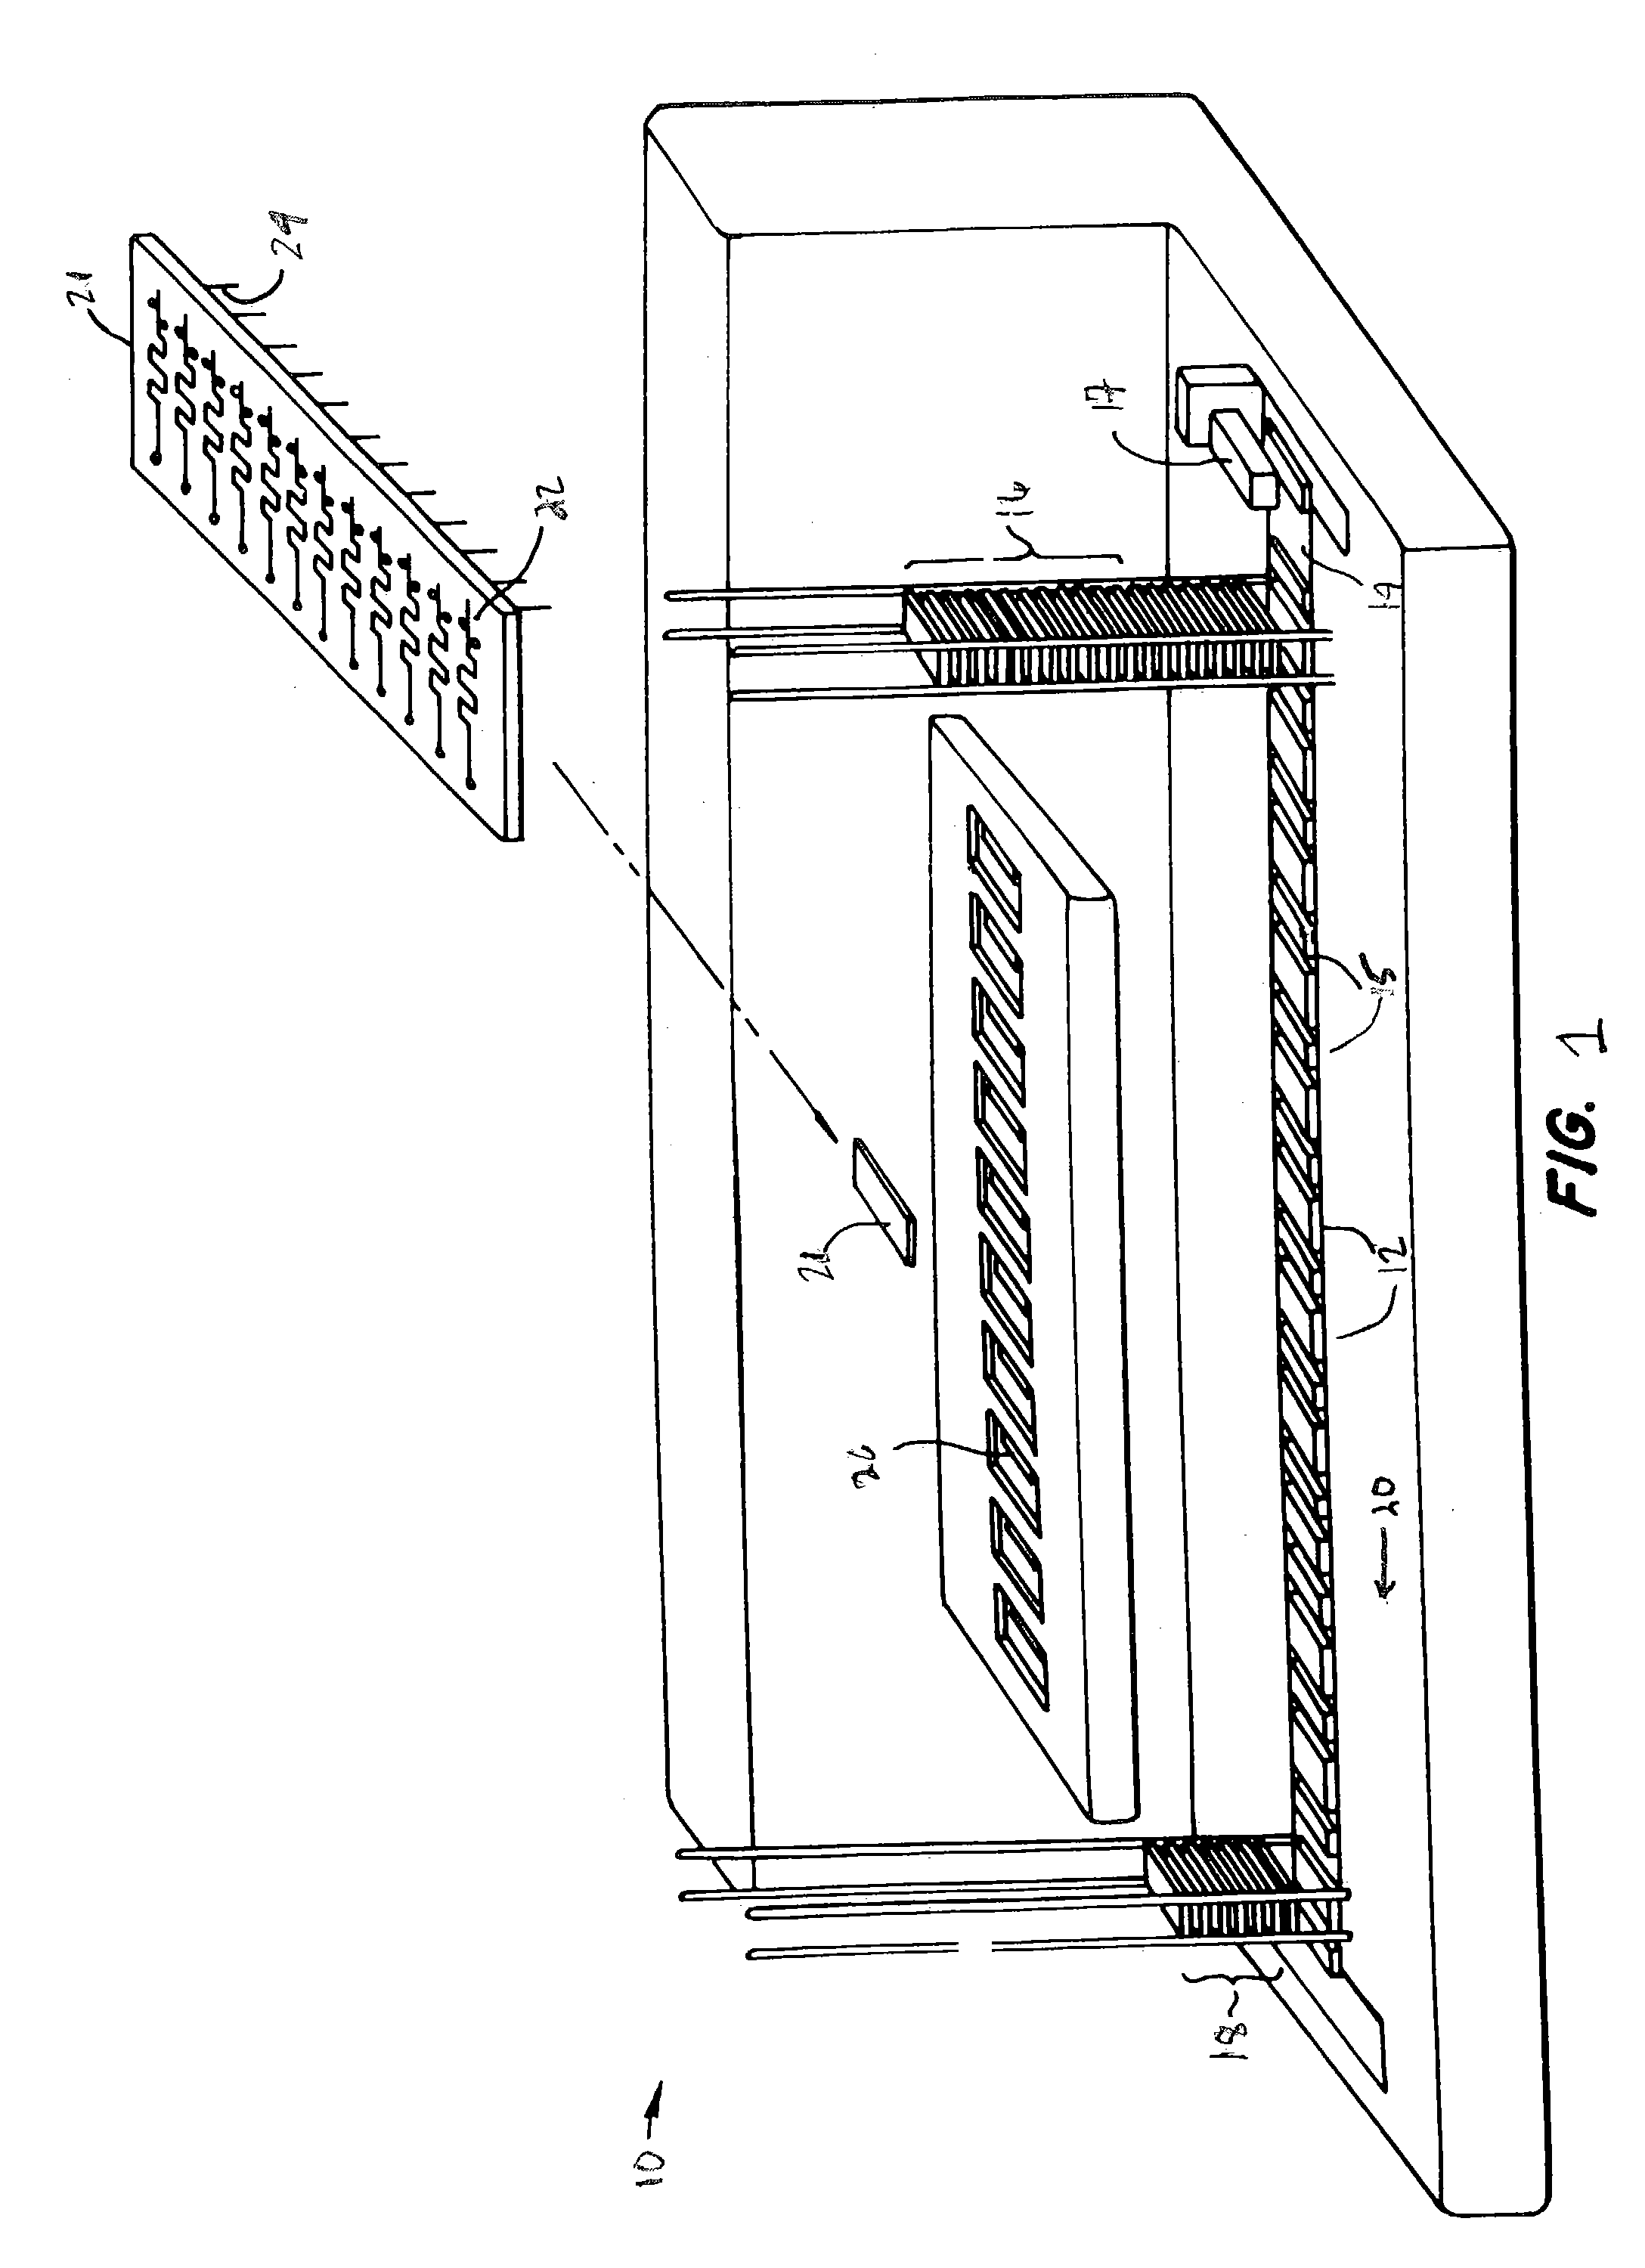 Methods and apparatus for minimizing evaporation of sample materials from multiwell plates